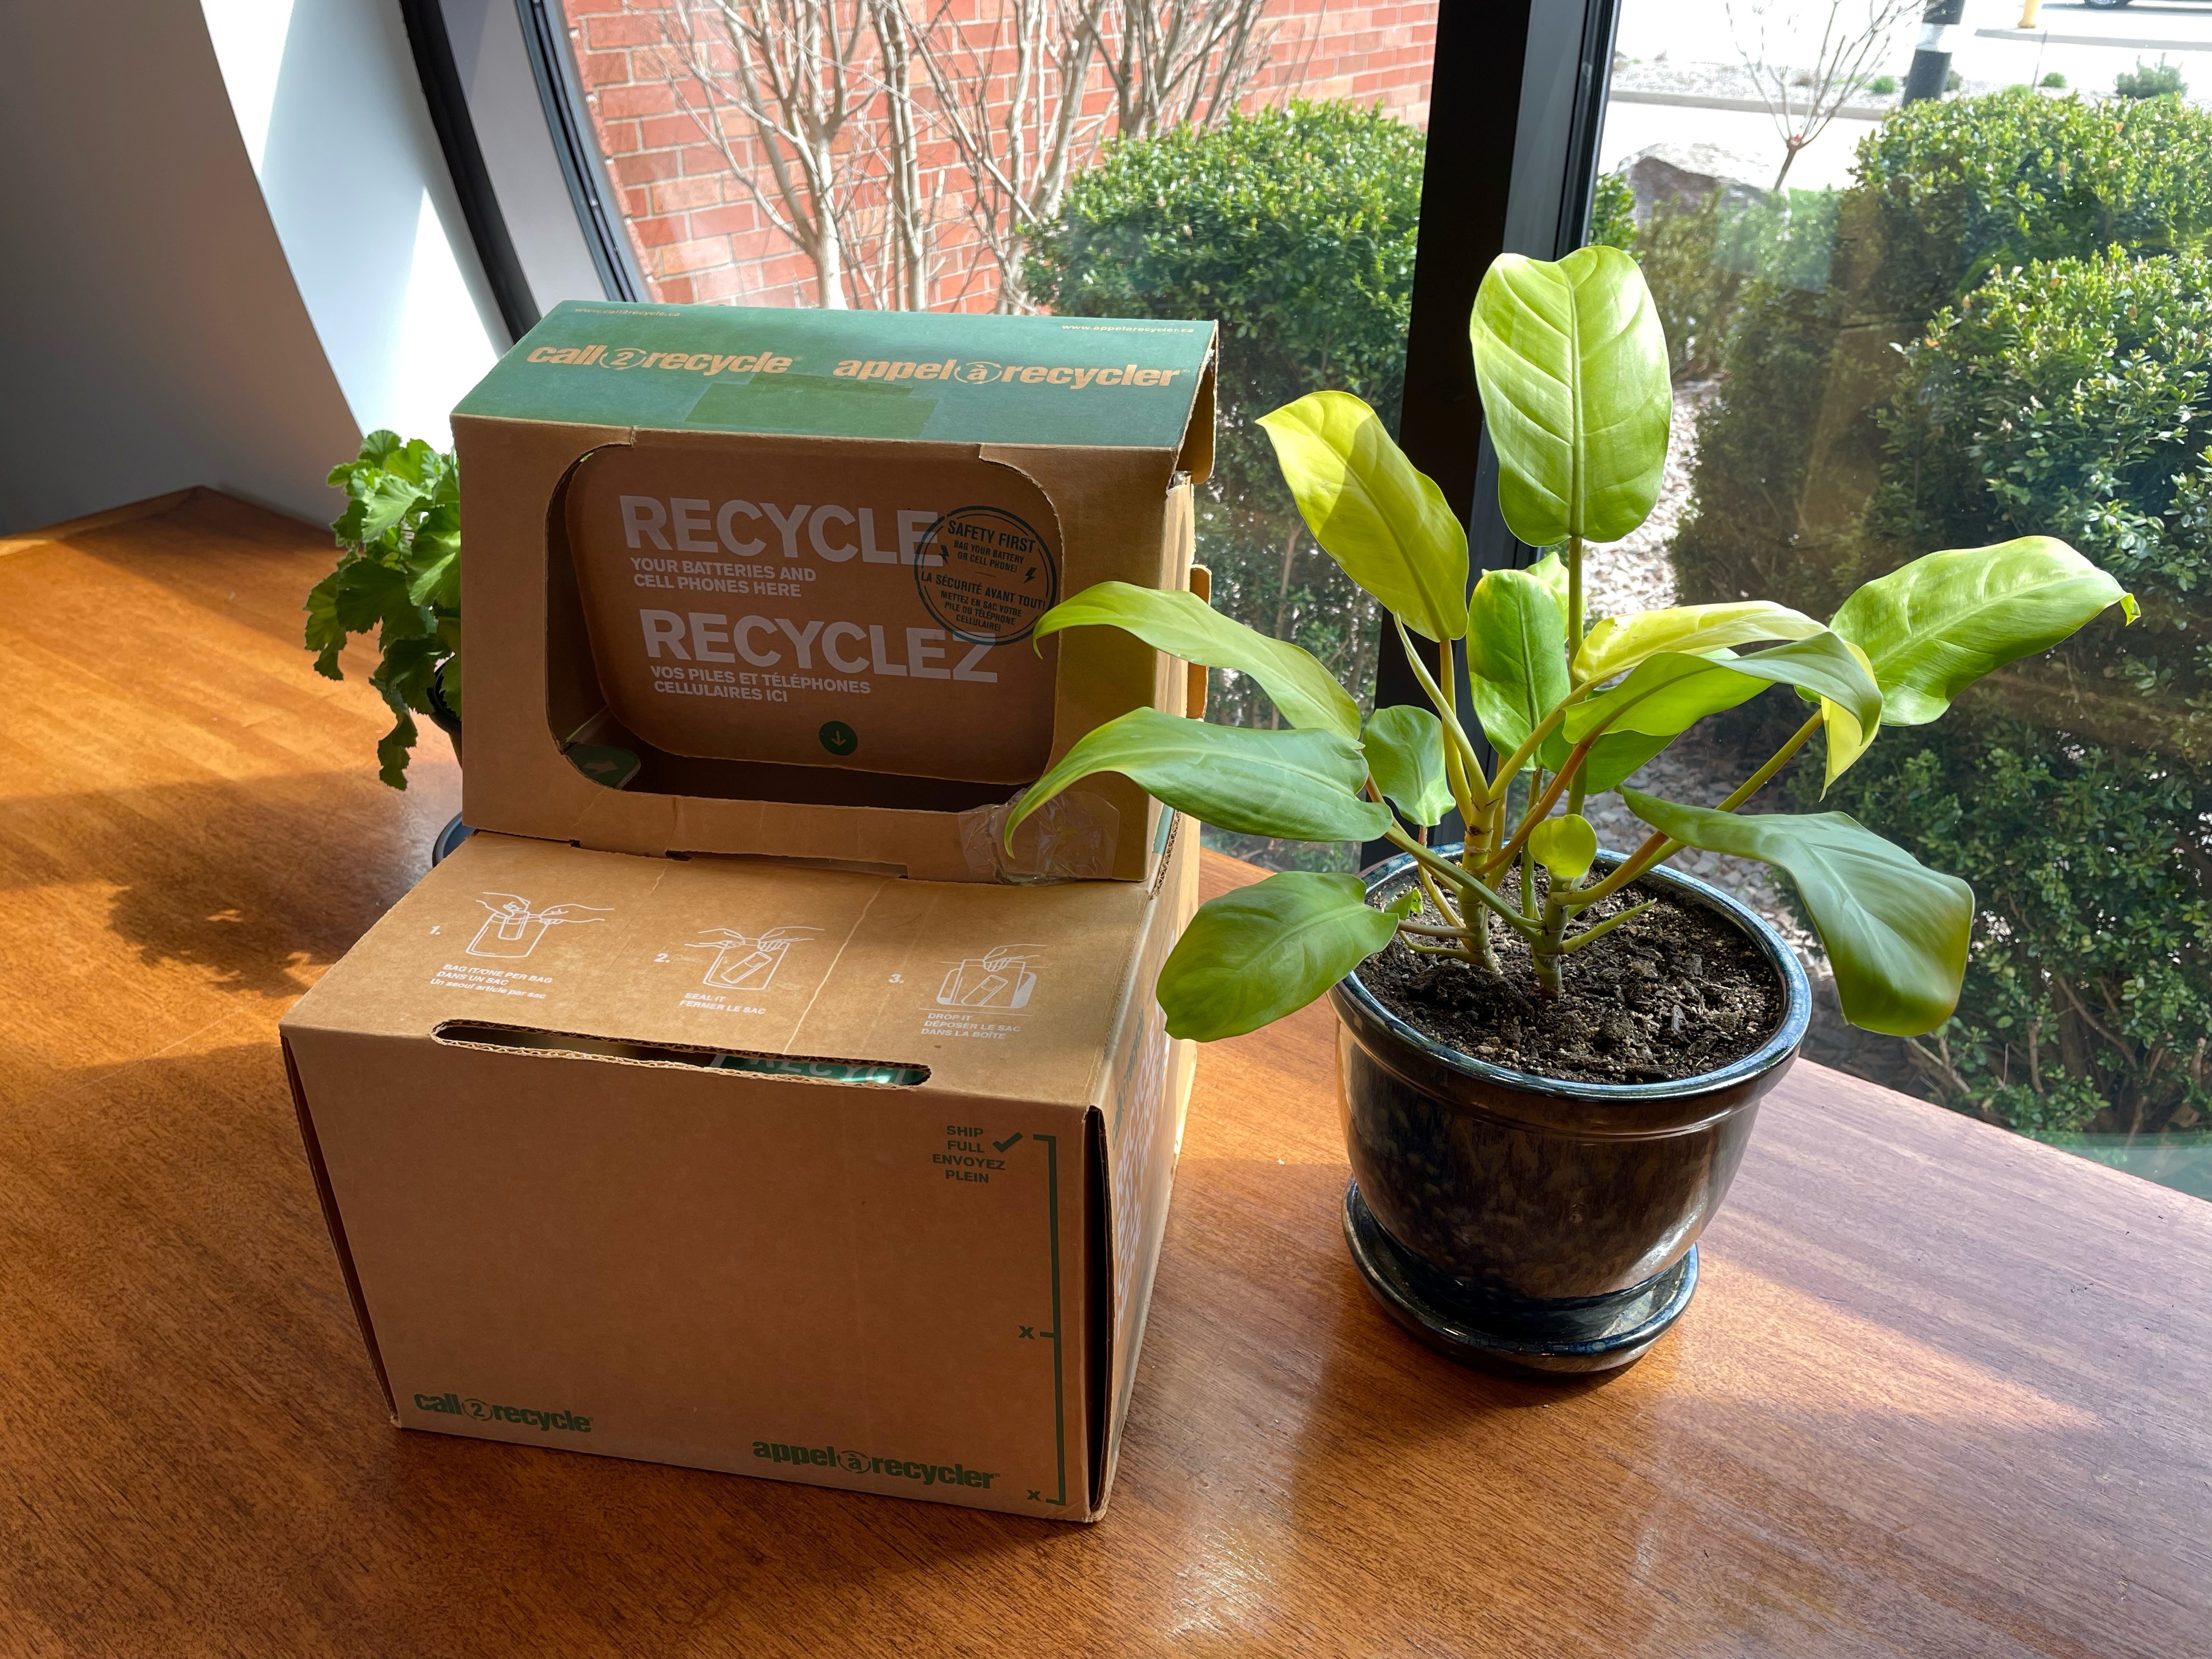 Call2Recycle battery recycling box in a sunny room between two houseplants.